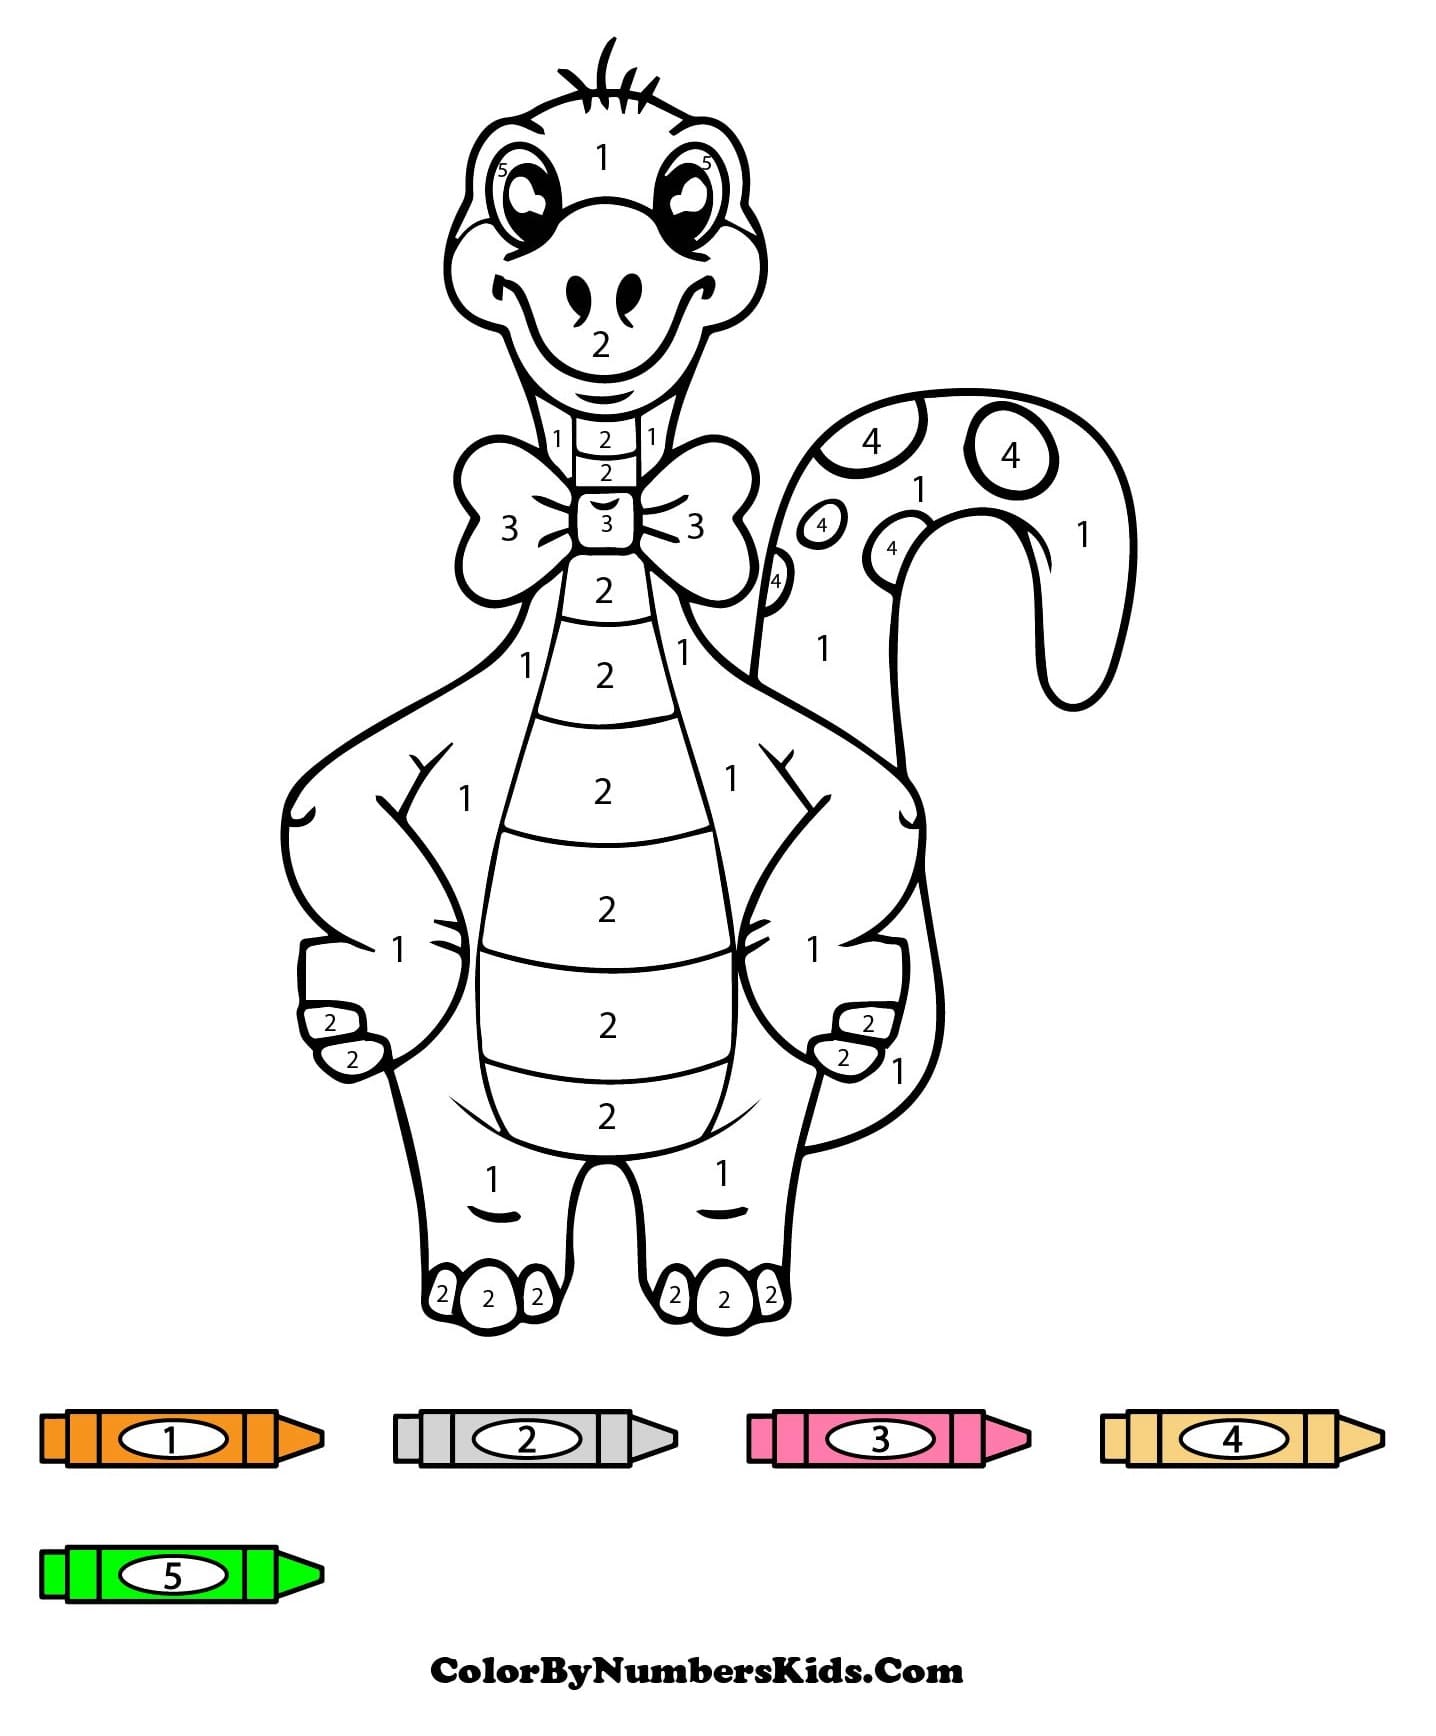 Cartoon Dinosaur Color By Number for Kids